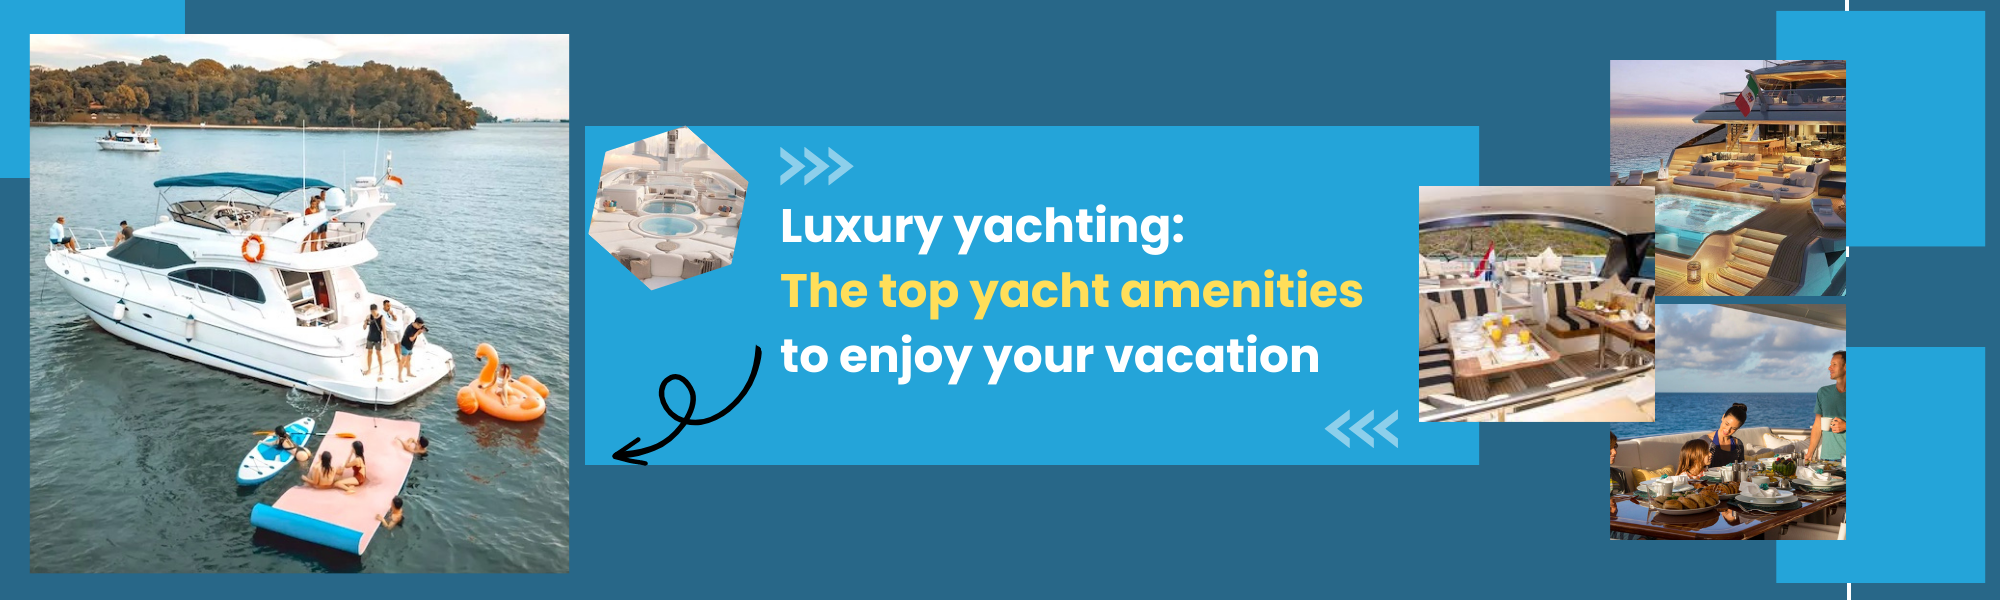 Luxury yachting: the top yacht amenities to enjoy your vacation